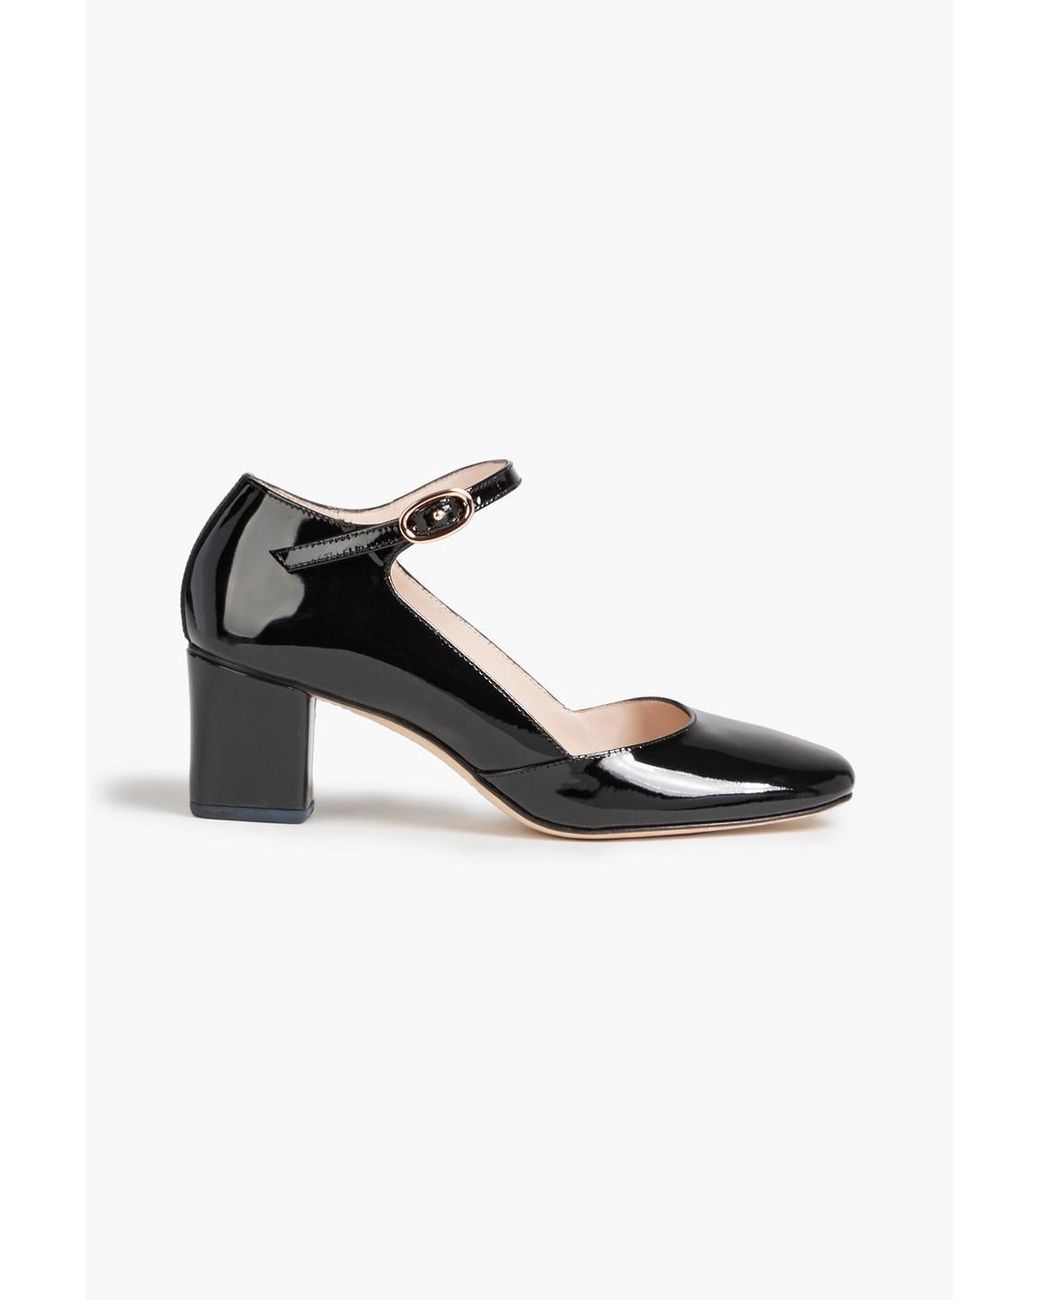 Repetto Dolly Patent-leather Mary Jane Pumps in Black | Lyst